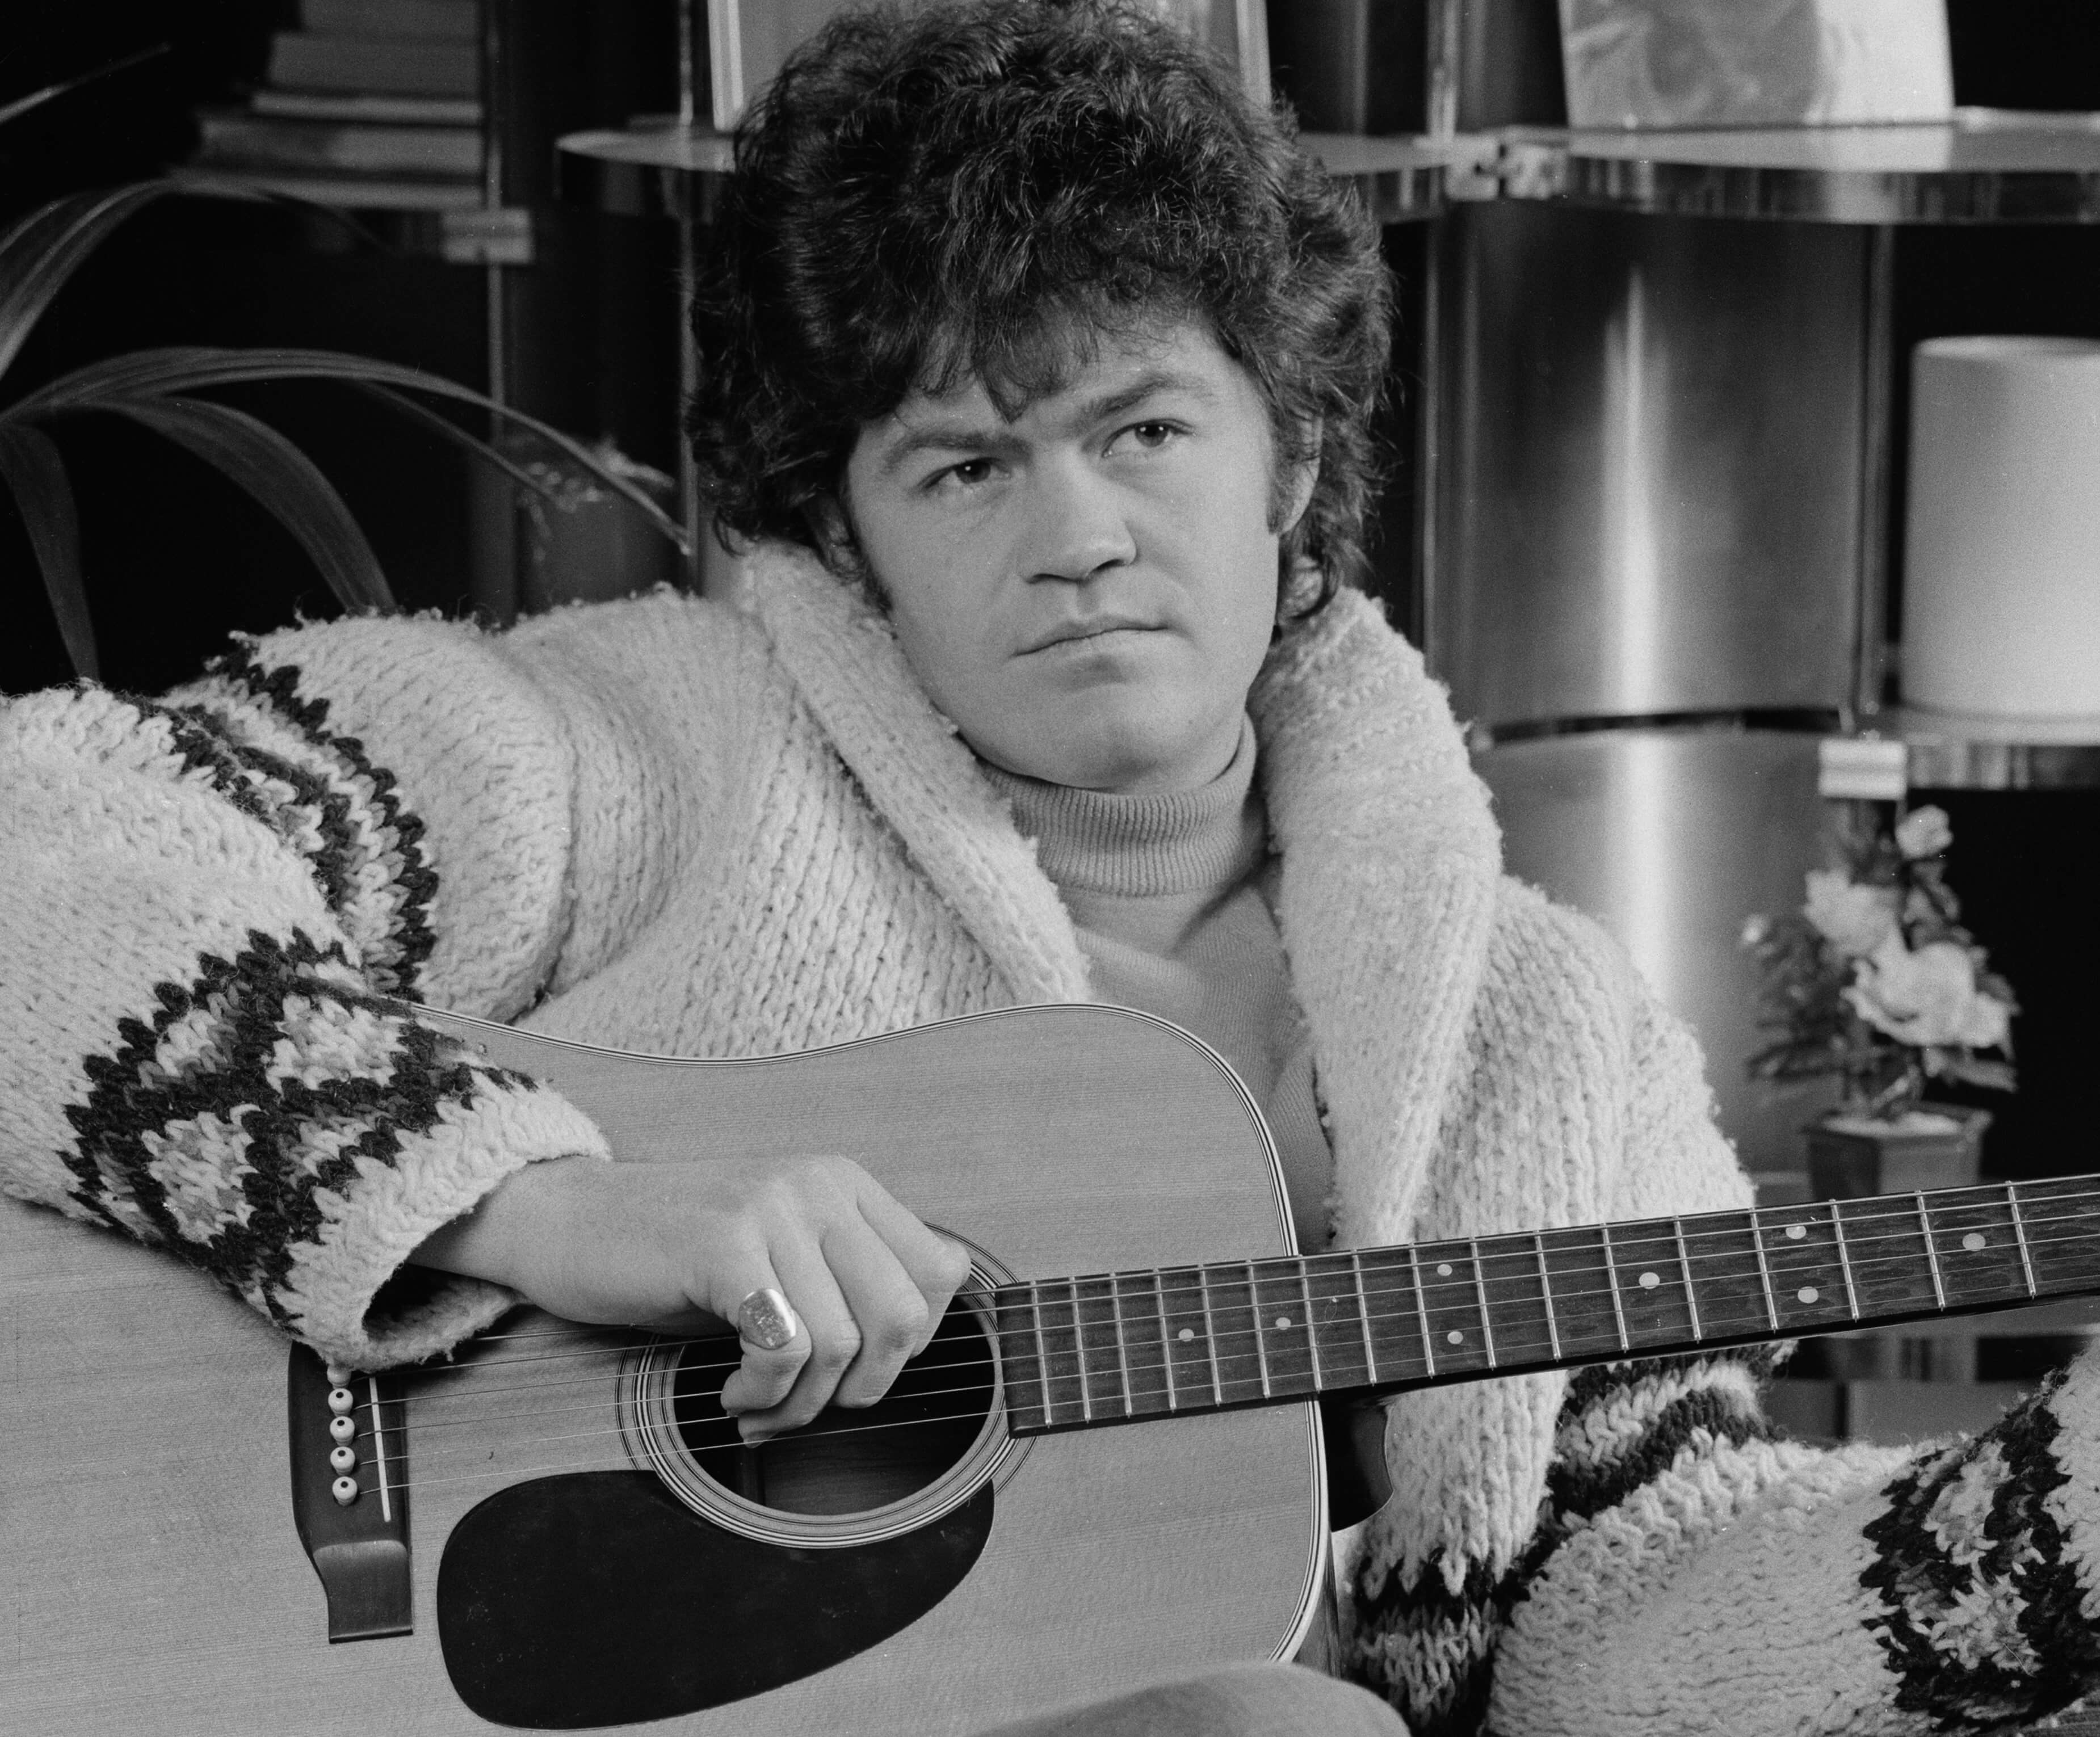 The Monkees' Micky Dolenz with a guitar